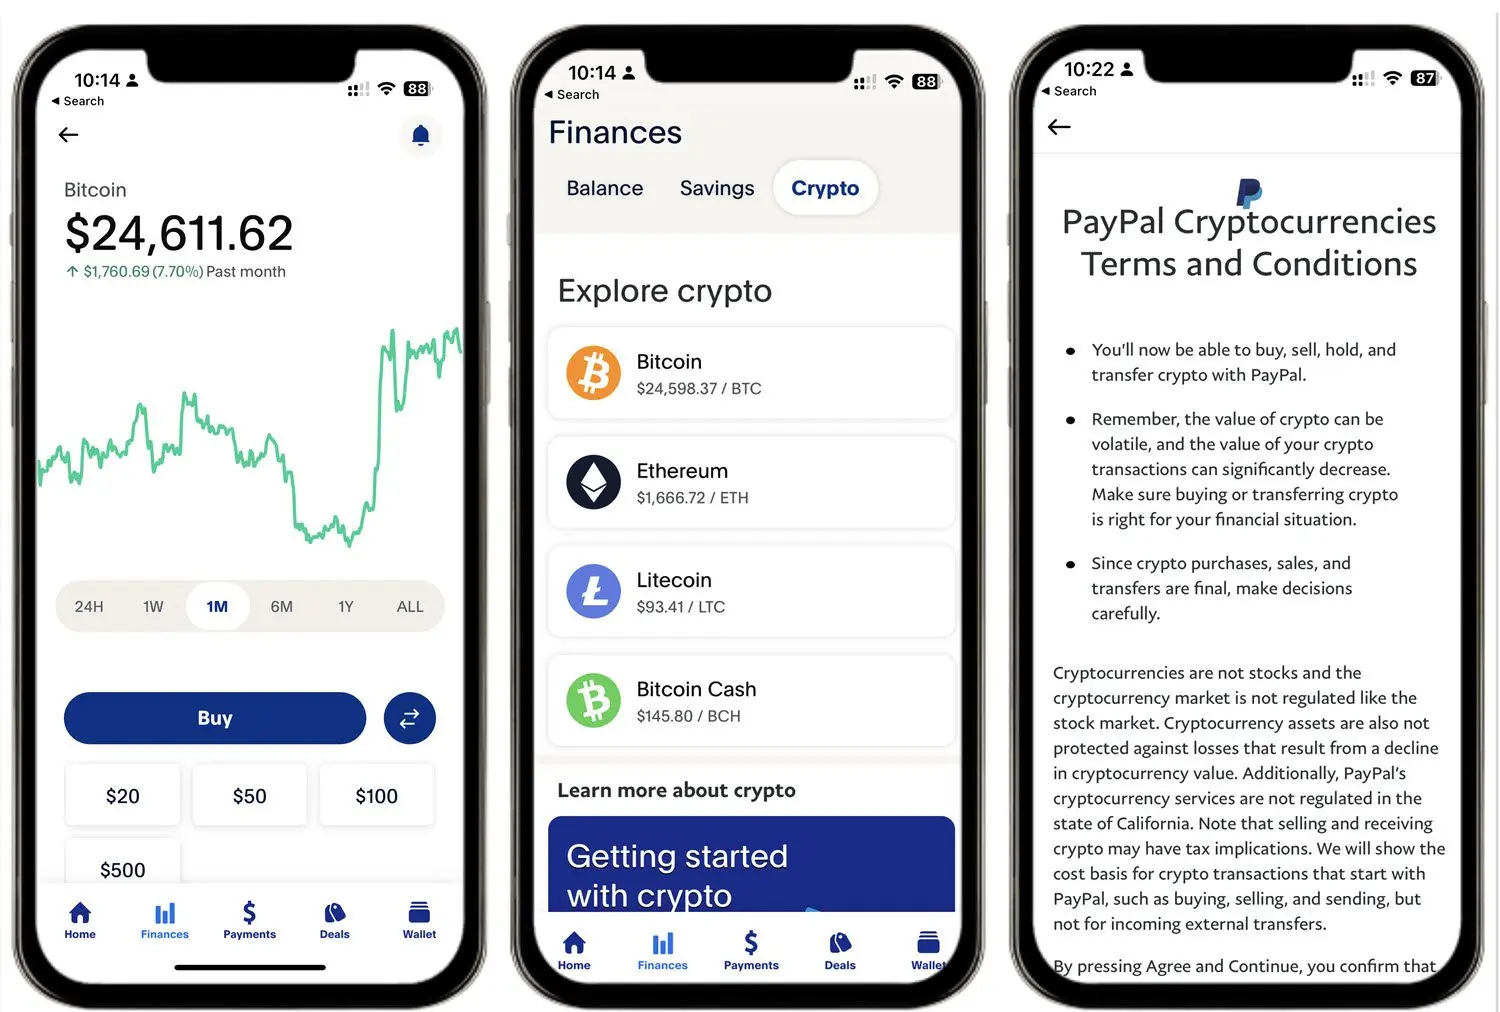 Screenshot of buying Bitcoin with PayPal via mobile app